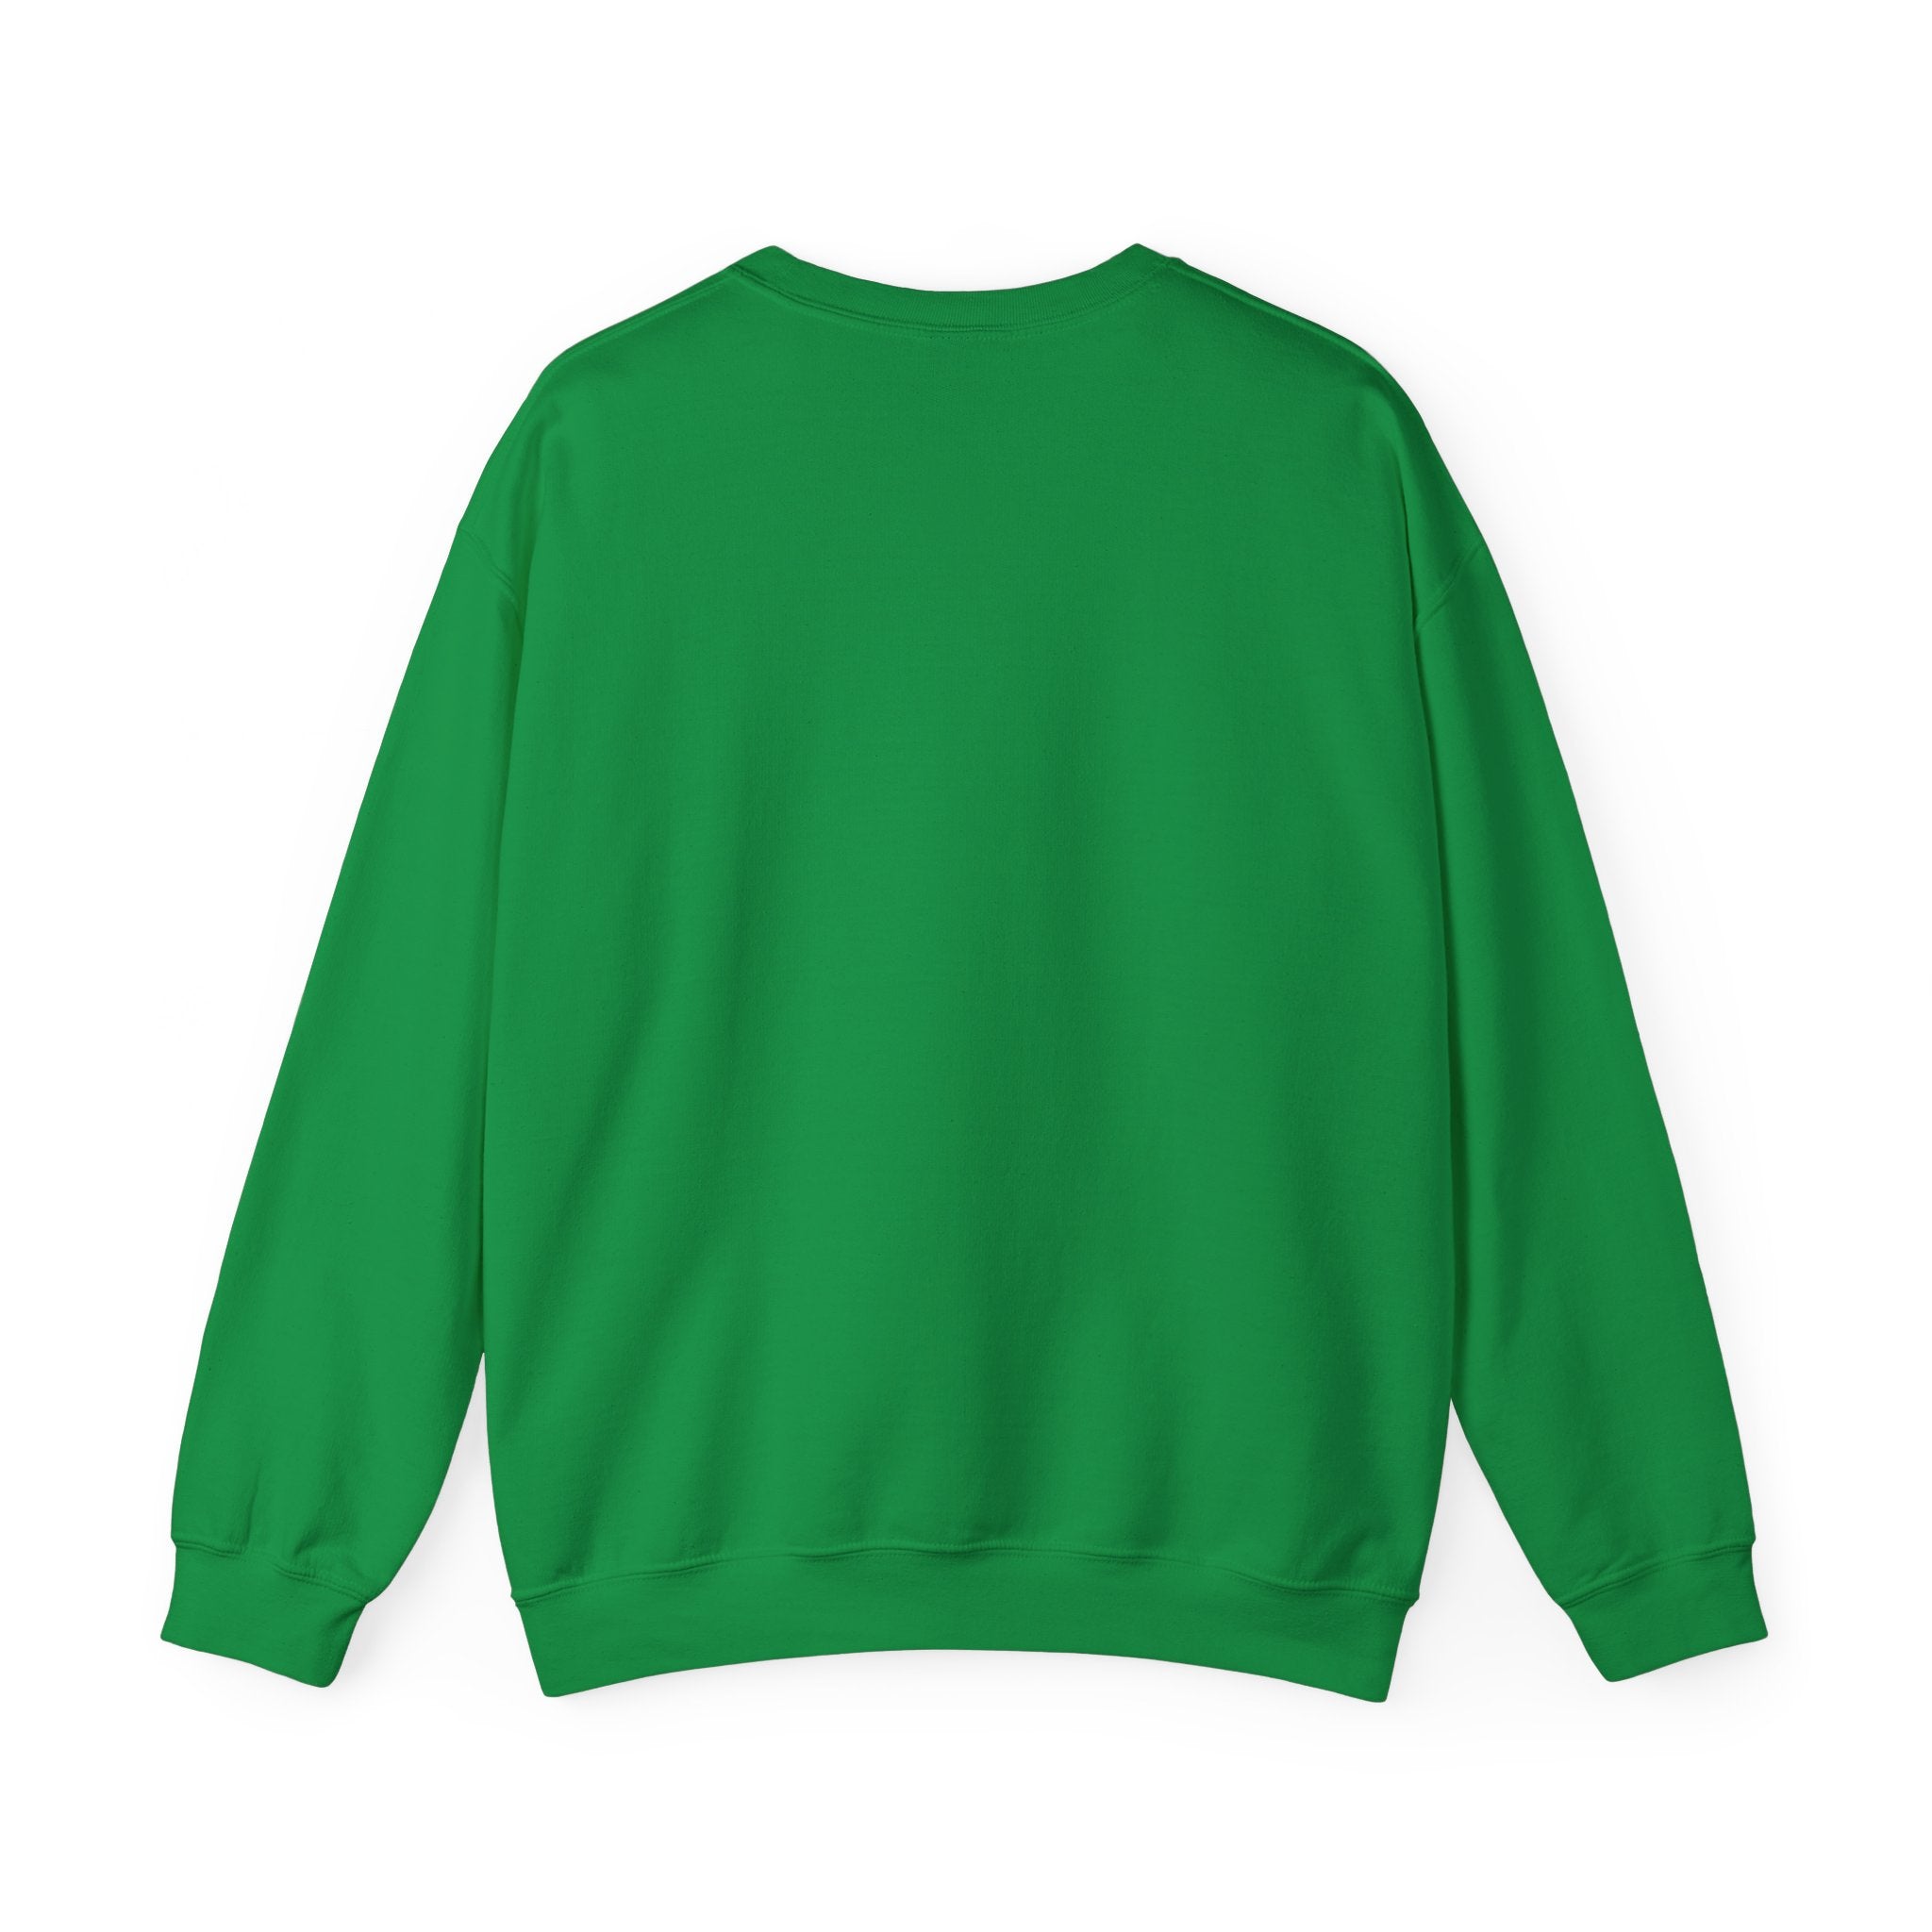 Green long-sleeve RG-B -  Sweatshirt with a round neckline, perfect for comfort lovers, displayed from the back on a white background.